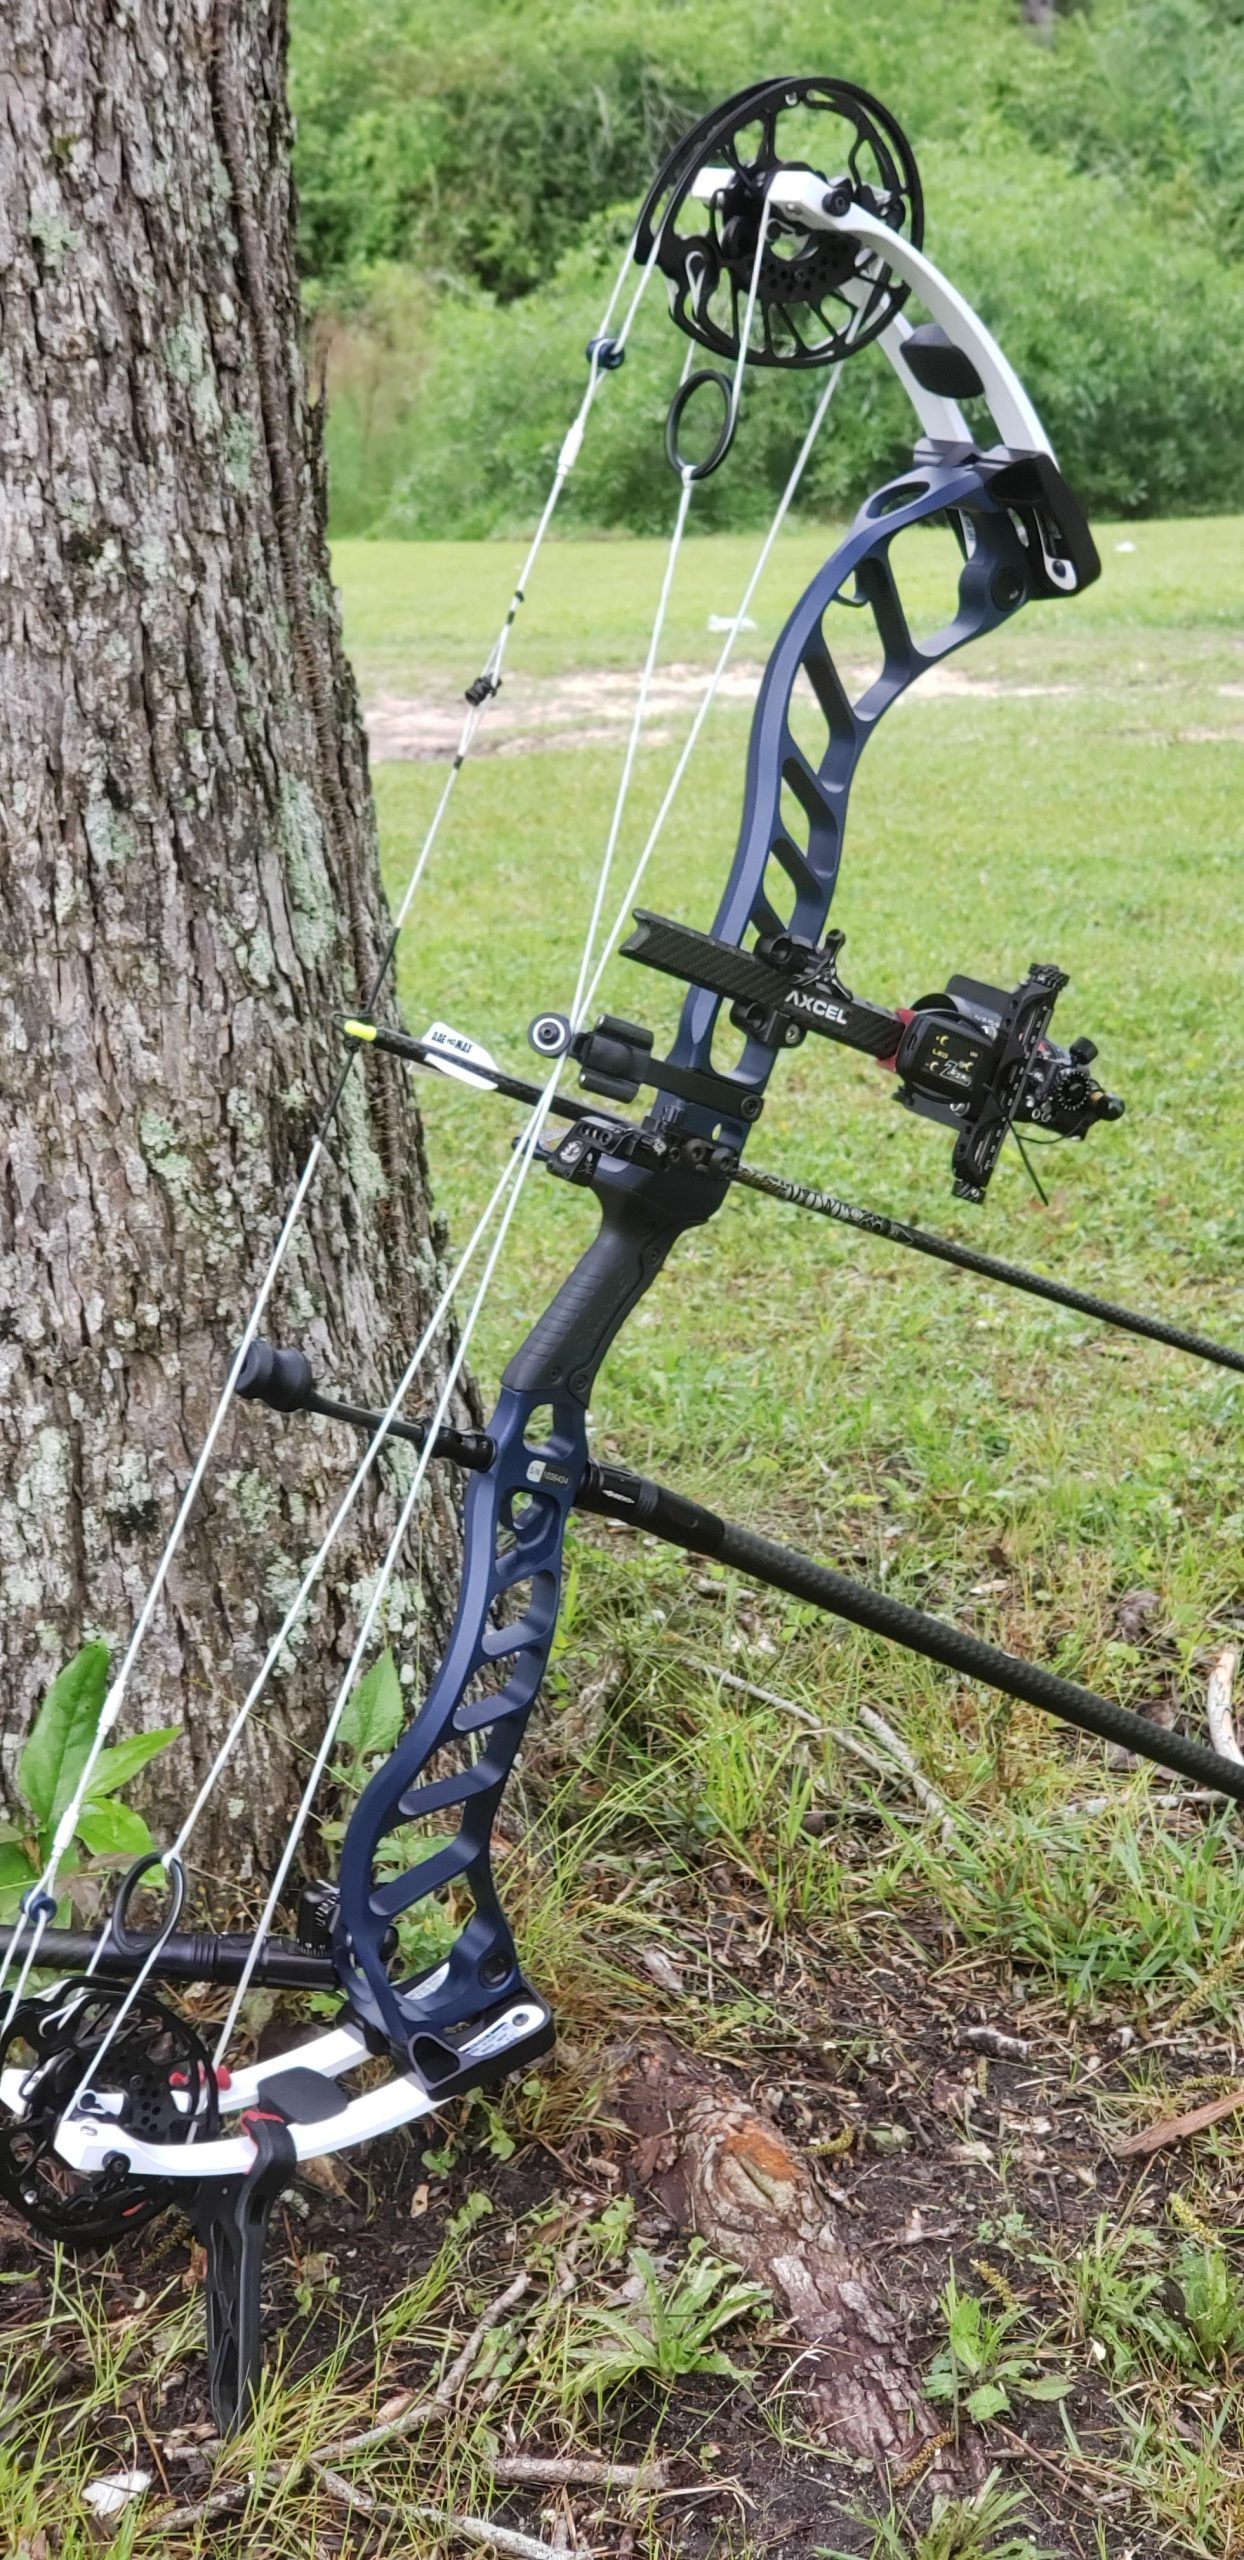 Prime Defy Compound Bow Specifications